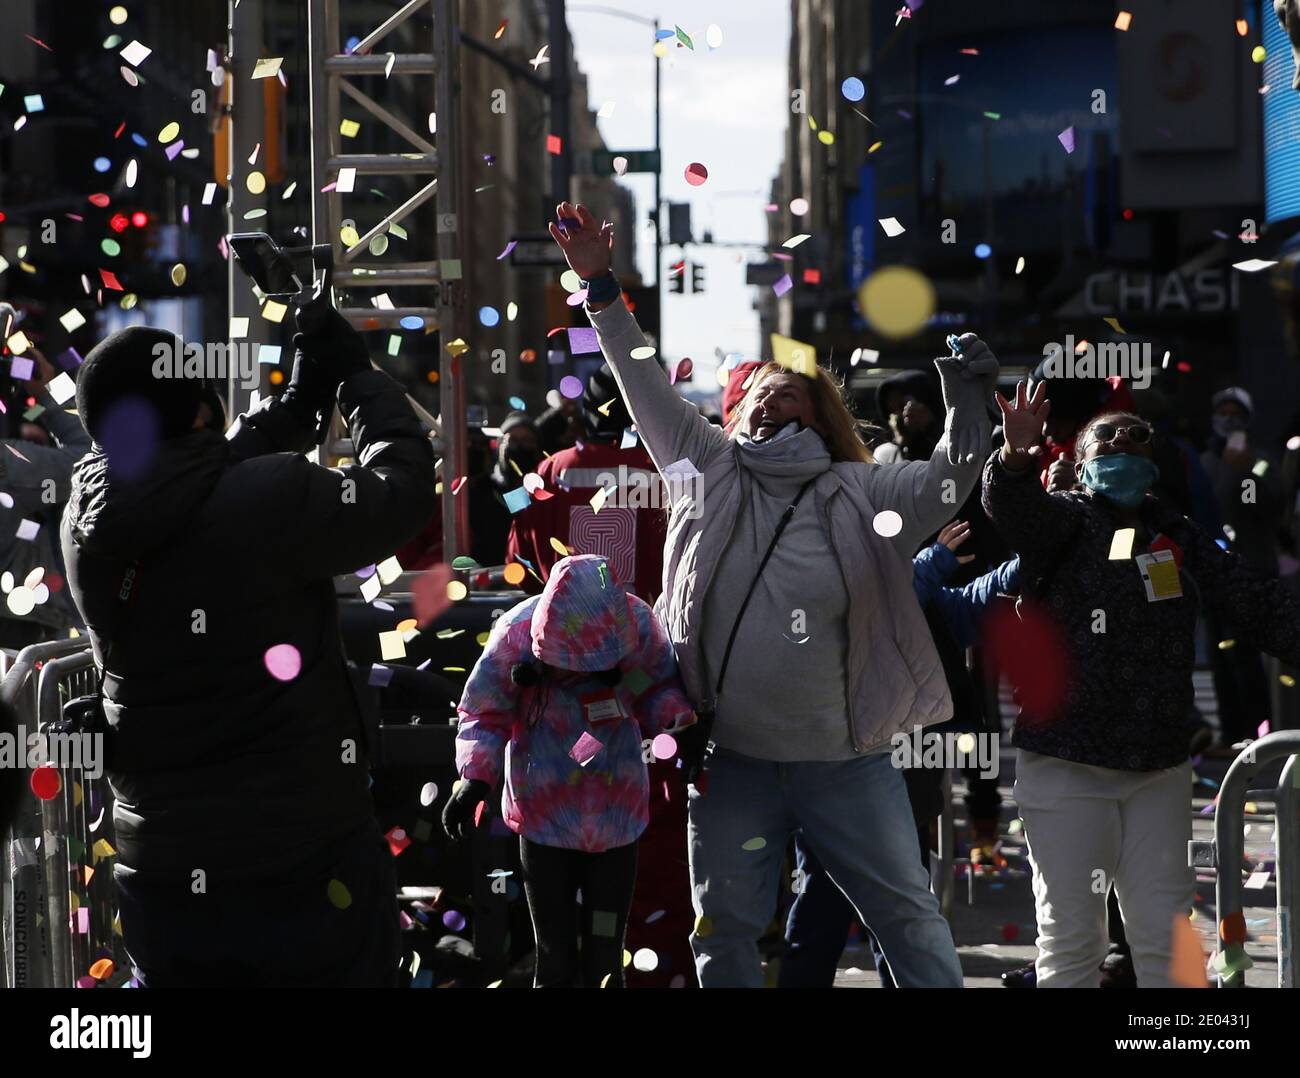 New York, United States. 29th Dec, 2020. Revelers react as confetti falls from the Hard Rock Cafe marquee as part of the annual New Year's Eve Confetti Test in Times Square in New York City on Tuesday, December 29, 2020. Due to the ongoing COVID-19 pandemic, New Years Eve 2021 in Times Square will not be open to the public this year. Photo by John Angelillo/UPI Credit: UPI/Alamy Live News Stock Photo